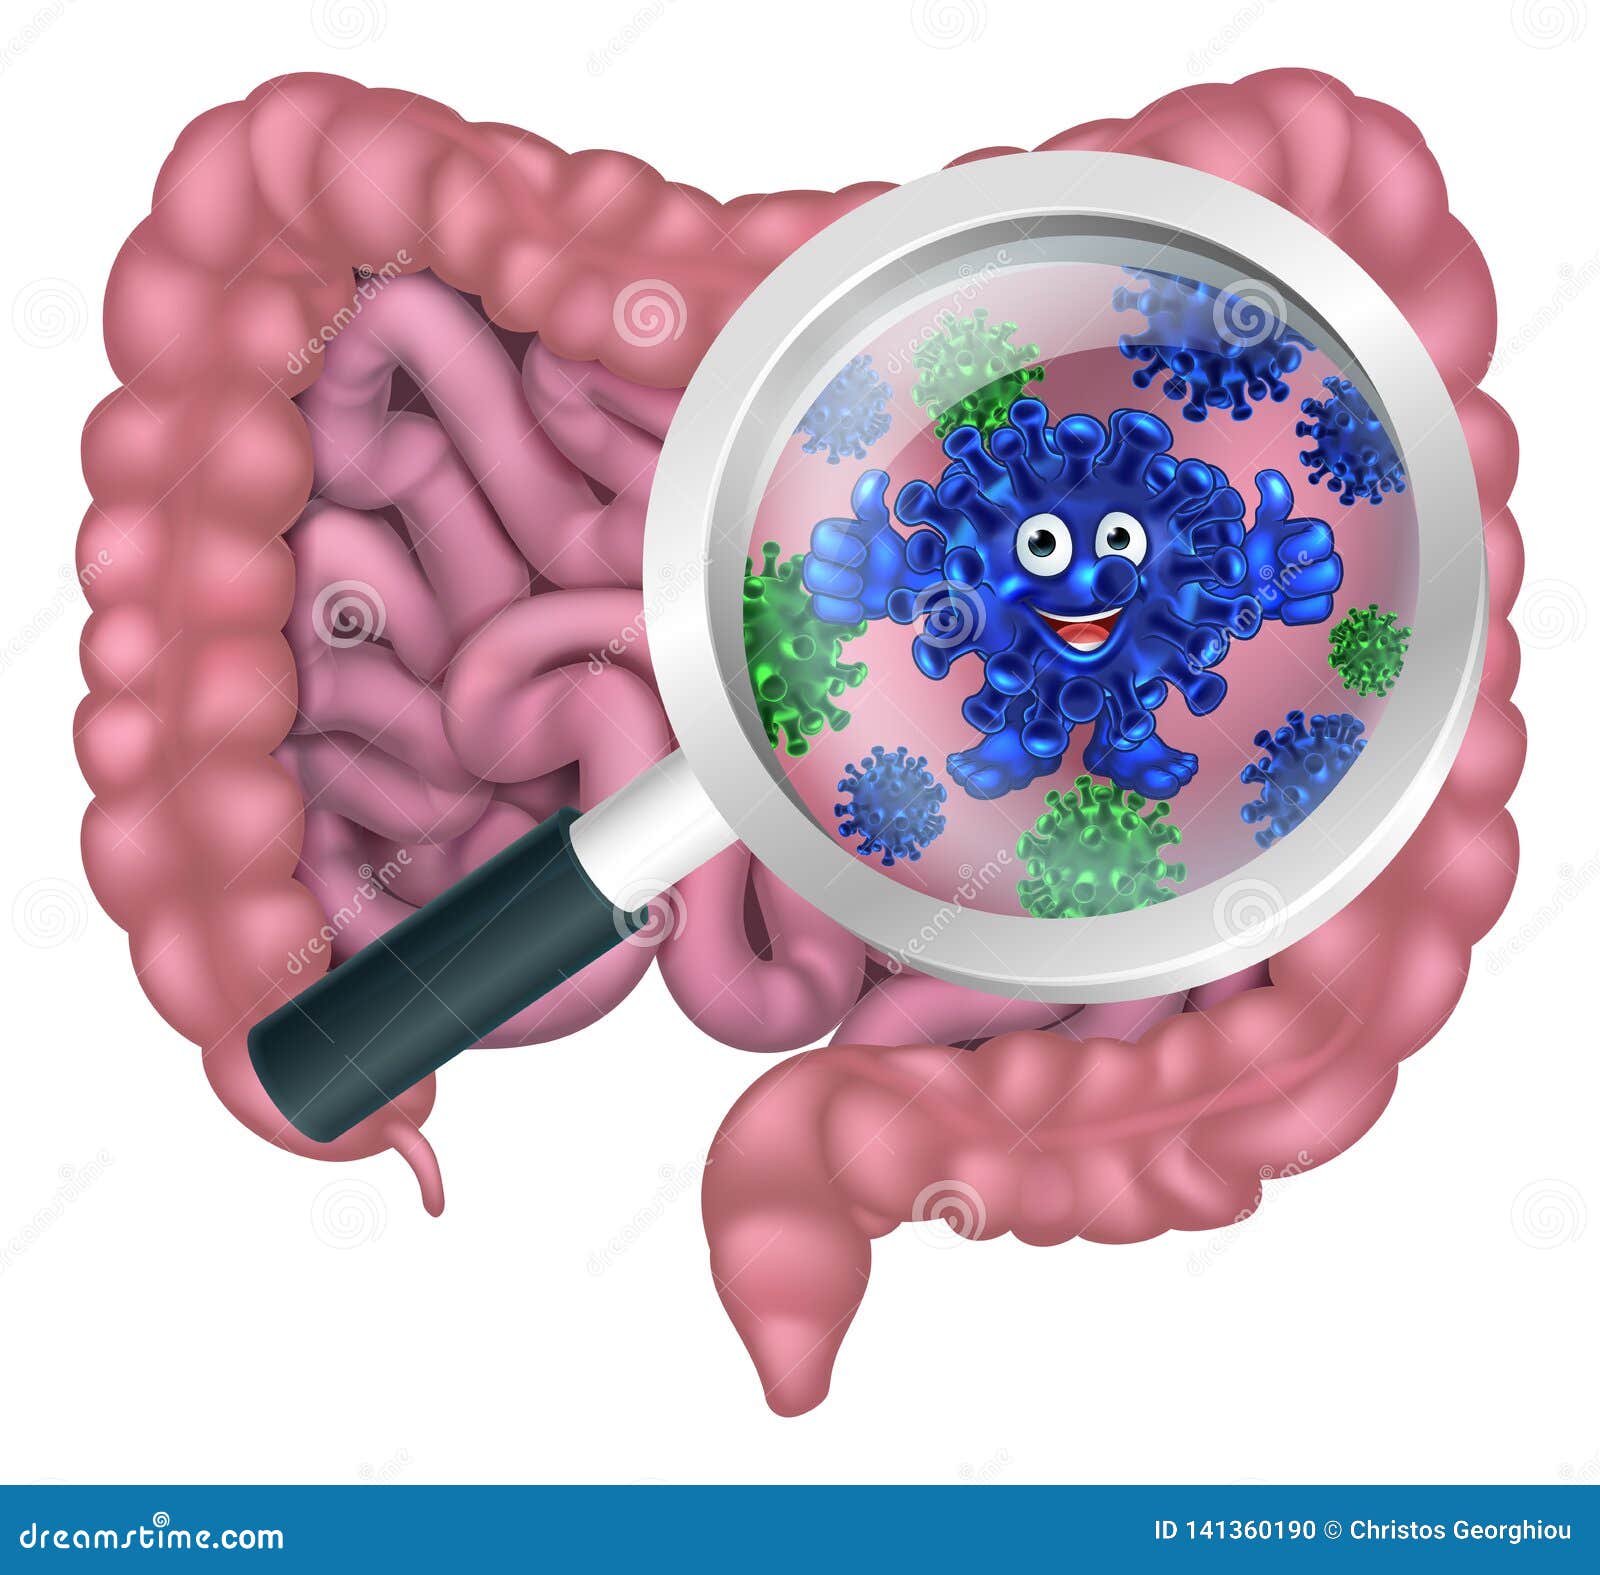 bacteria cartoon character in gut or intestines